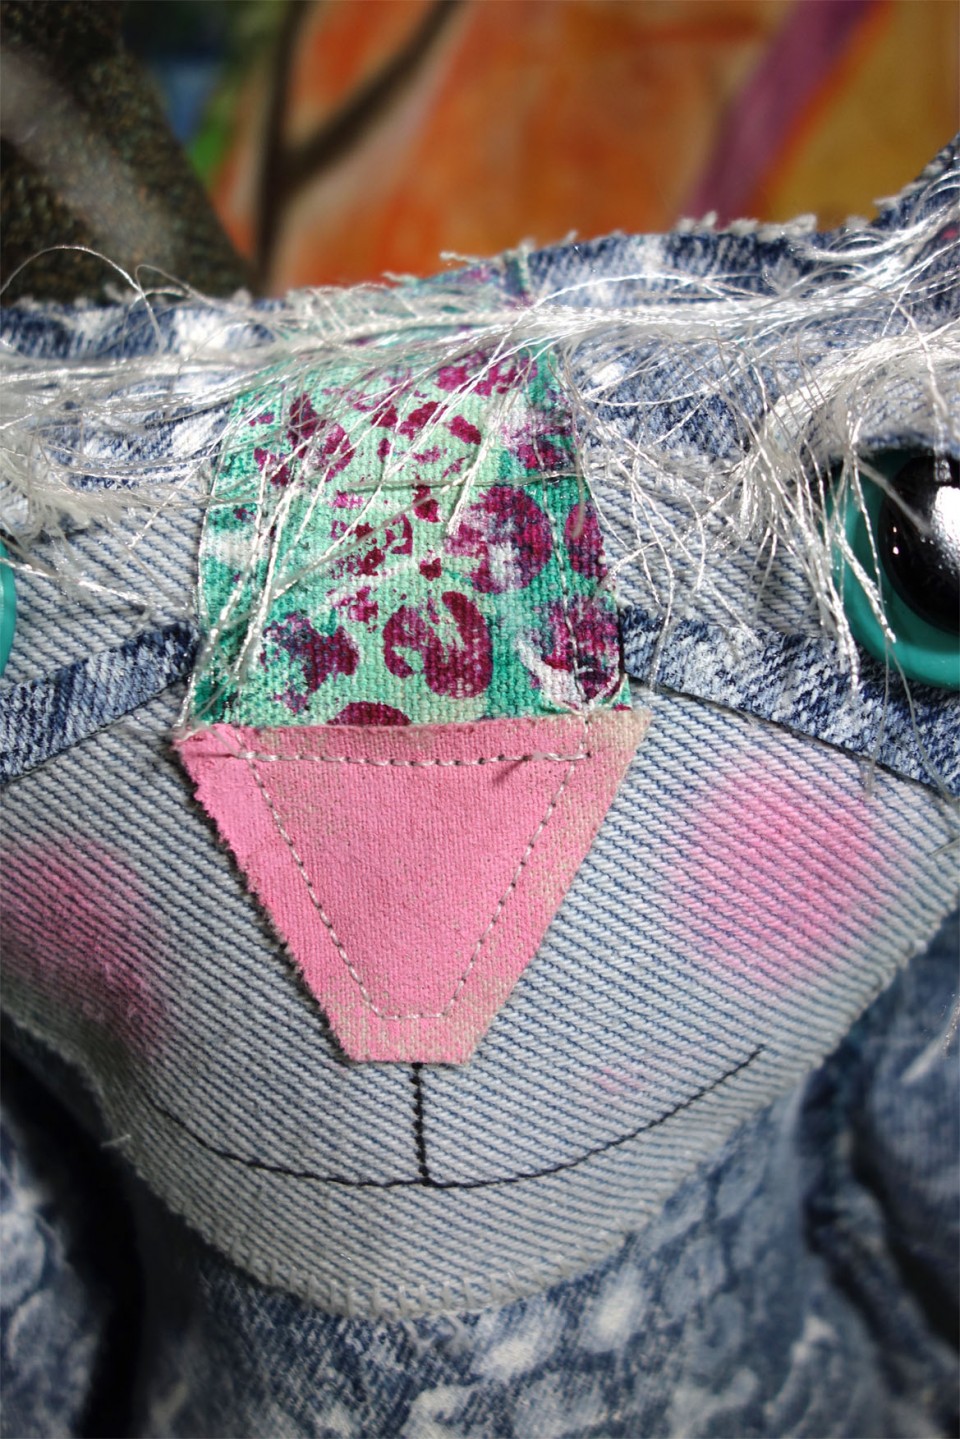 Closeup of a denim cat dolls adorable face made from hand painted demin fabric.